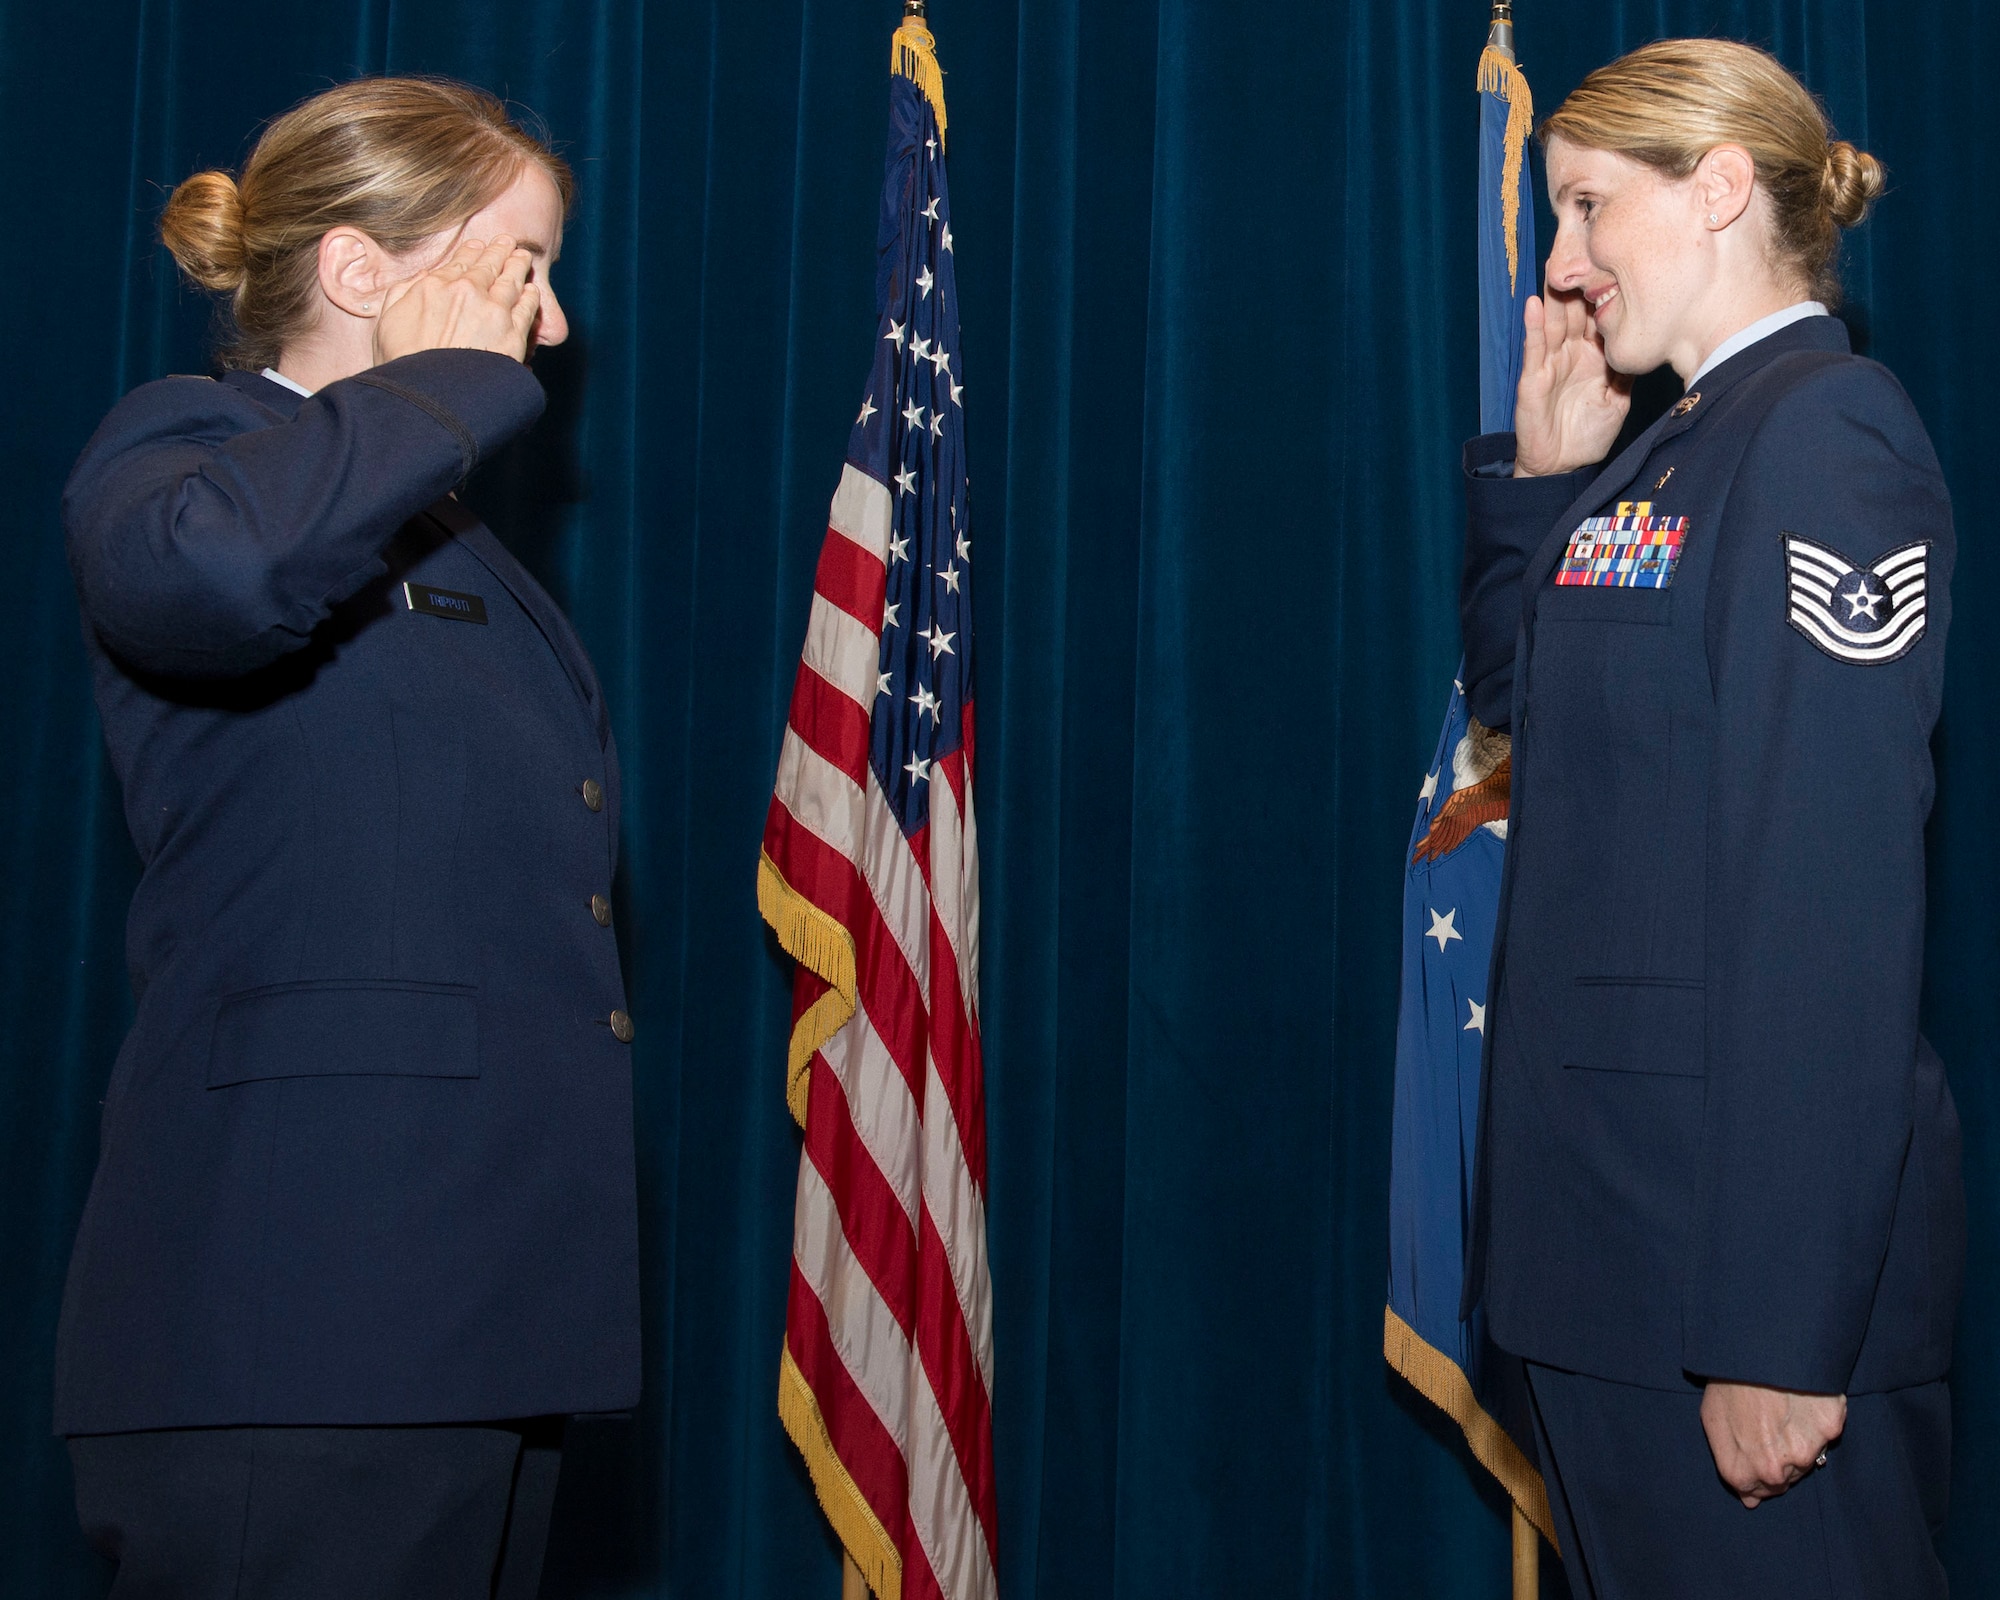 U.S. Air Force Capt. Nicole Tripputi, a contract negotiator with the 645th Aeronautical Systems Group, Big Safari, gives the oath of enlistment to her sister, Tech. Sgt. Jennifer Stem, 88th Aerospace medicine squadron ophthalmic technician, during a re-enlistment ceremony June 19 inside the auditorium of the Wright-Patterson Medical Center at Wright-Patterson Air Force Base. The two have been stationed together at WPAFB for the first time since August 2016.(U.S. Air Force photos/Michelle Gigante)